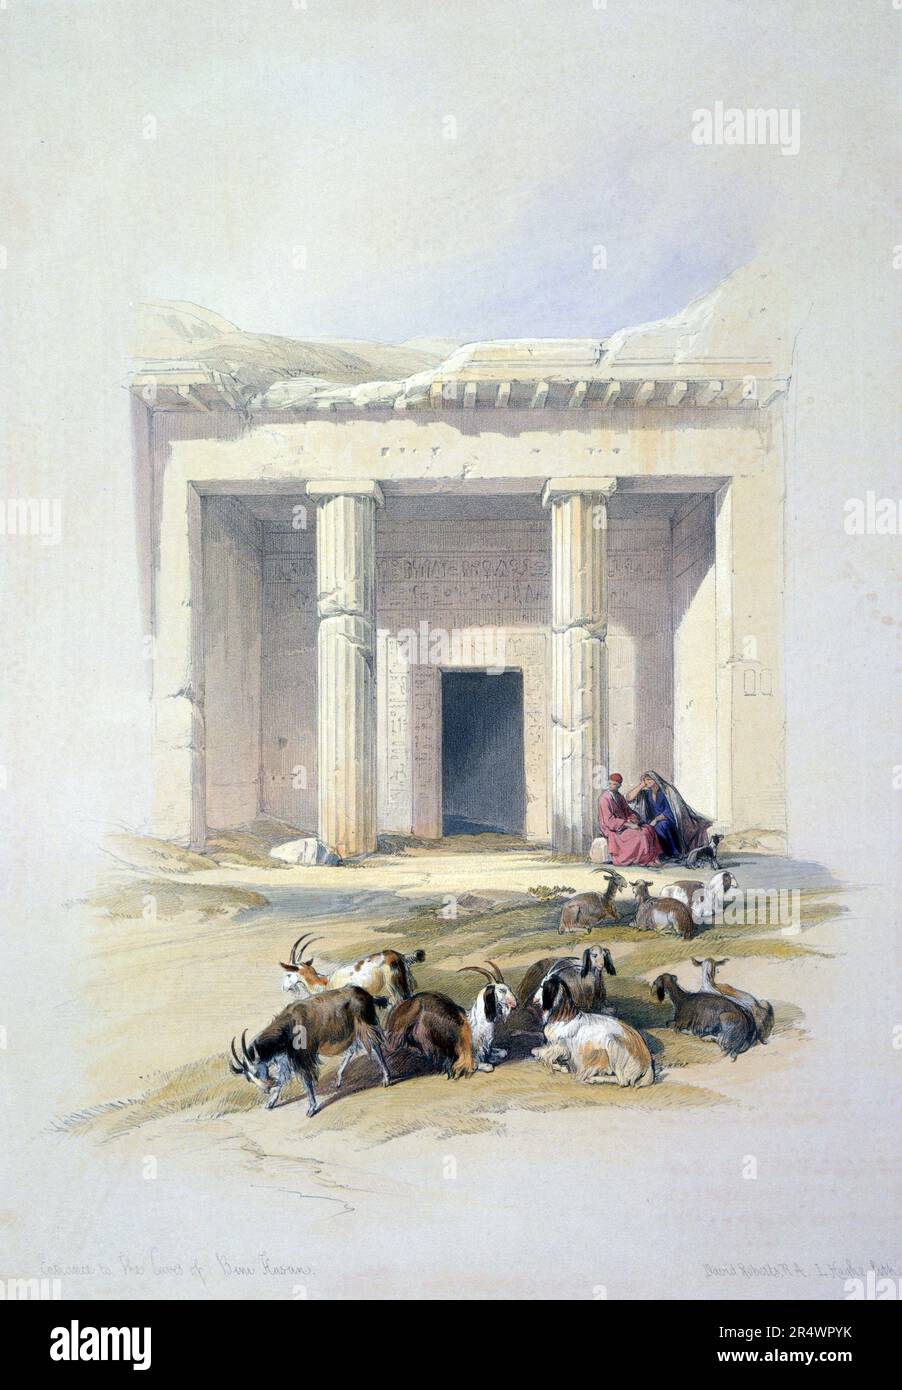 Entrance to the Caves at Beni Hasan'.  Lithograph of 1856 after David Roberts (1796-1864) Scottish artist and orientalist. Ancient Egyptian burial site used mainly during the Middle Kingdom, 21st-17th centuries BC. Death Burial Stock Photo